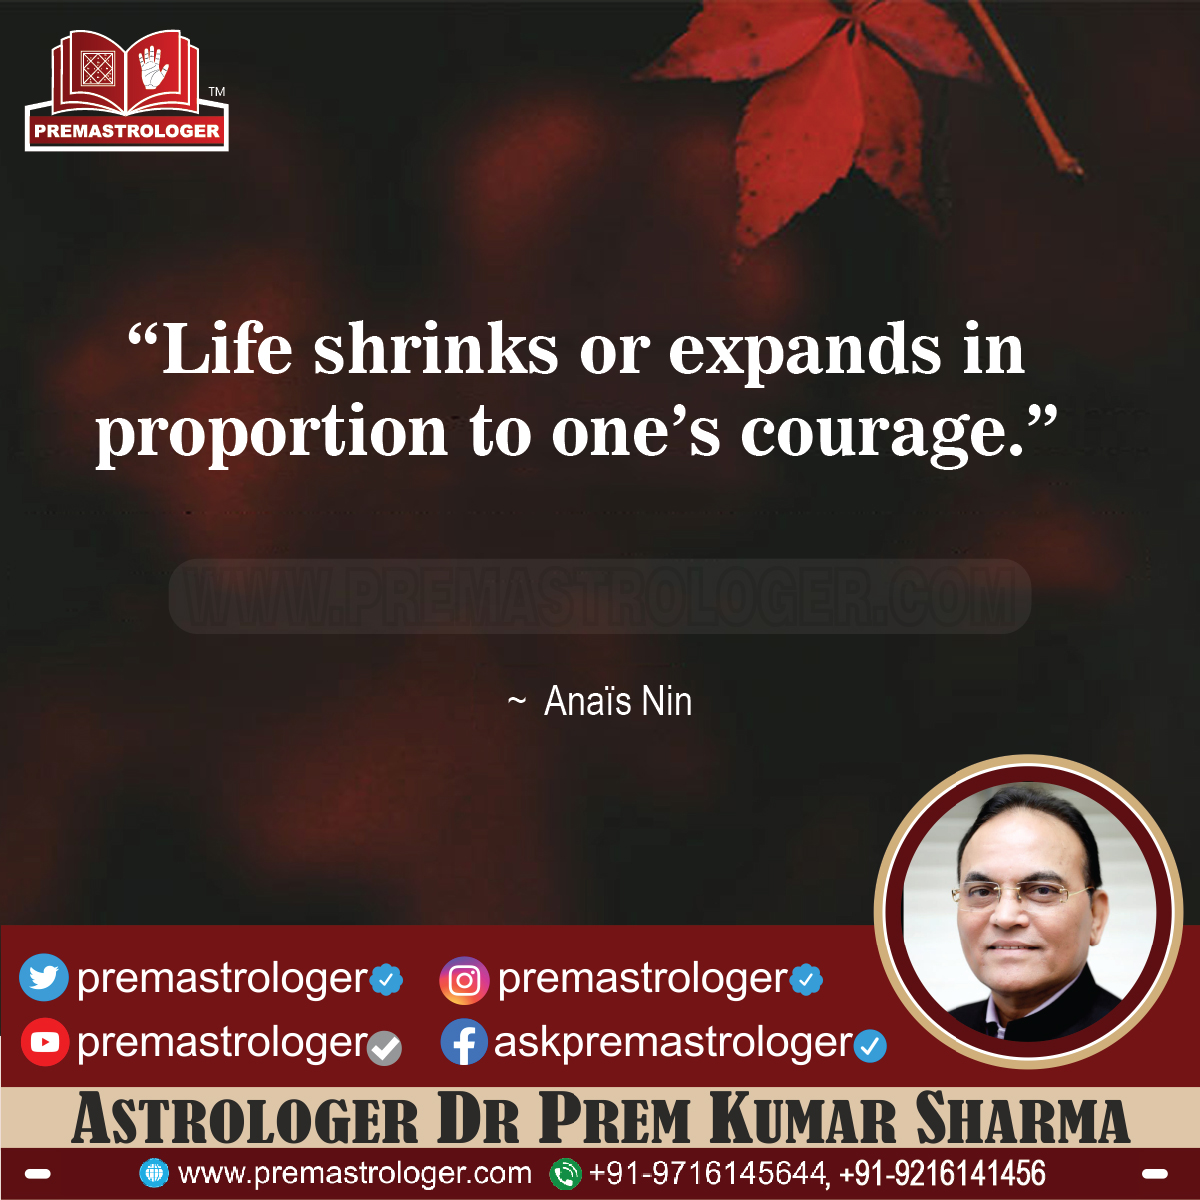 “Life shrinks or expands in proportion to one’s courage.” — Anaïs Nin #MotivationalQuotes #motivational #positivityspread #PositiveVibesOnly